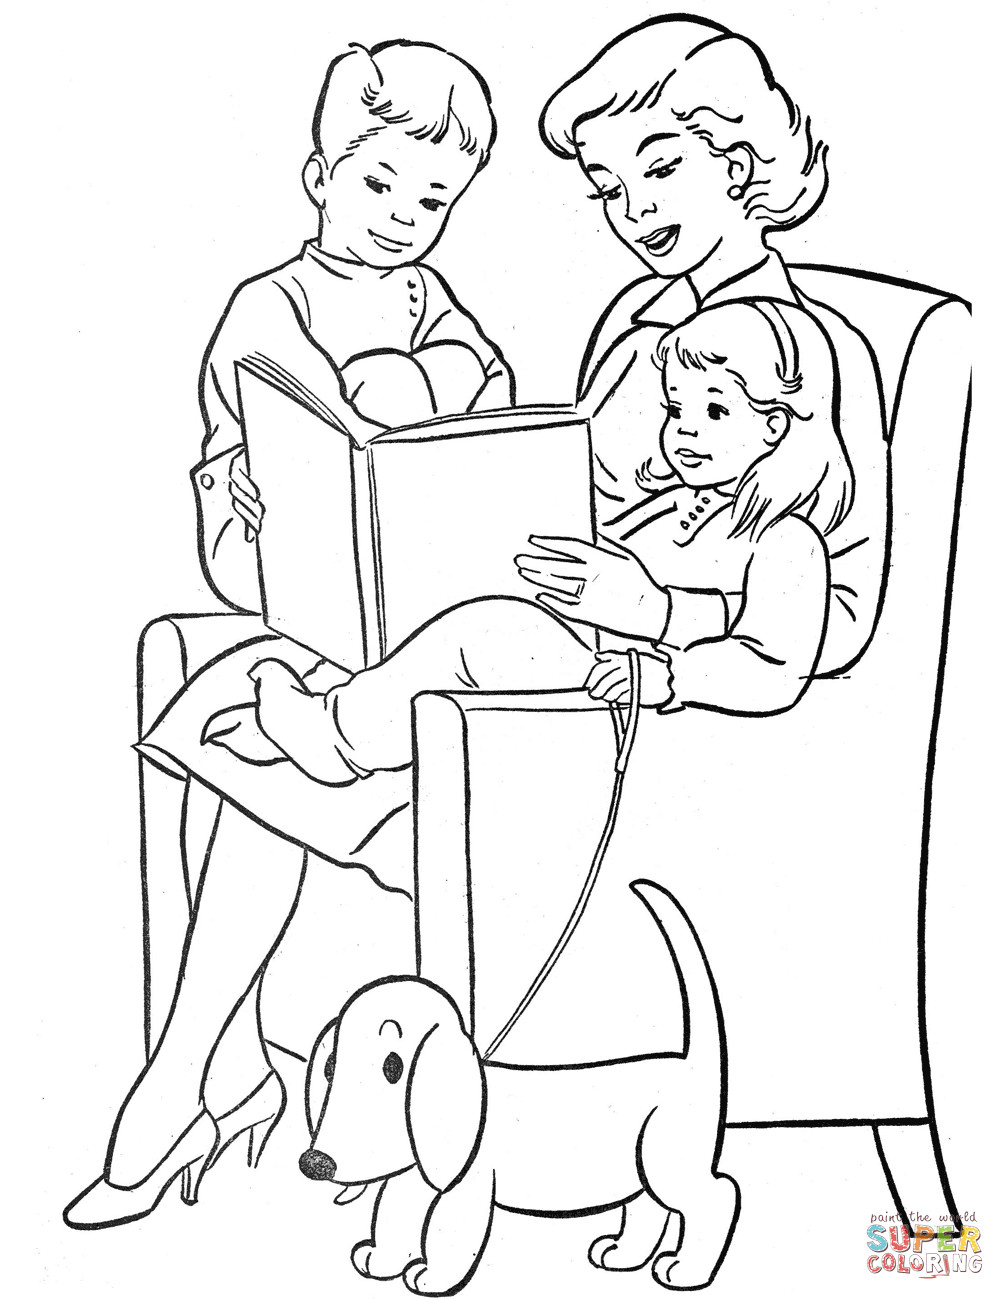 Mom Coloring Pages To Print
 Mom Reading to Children coloring page